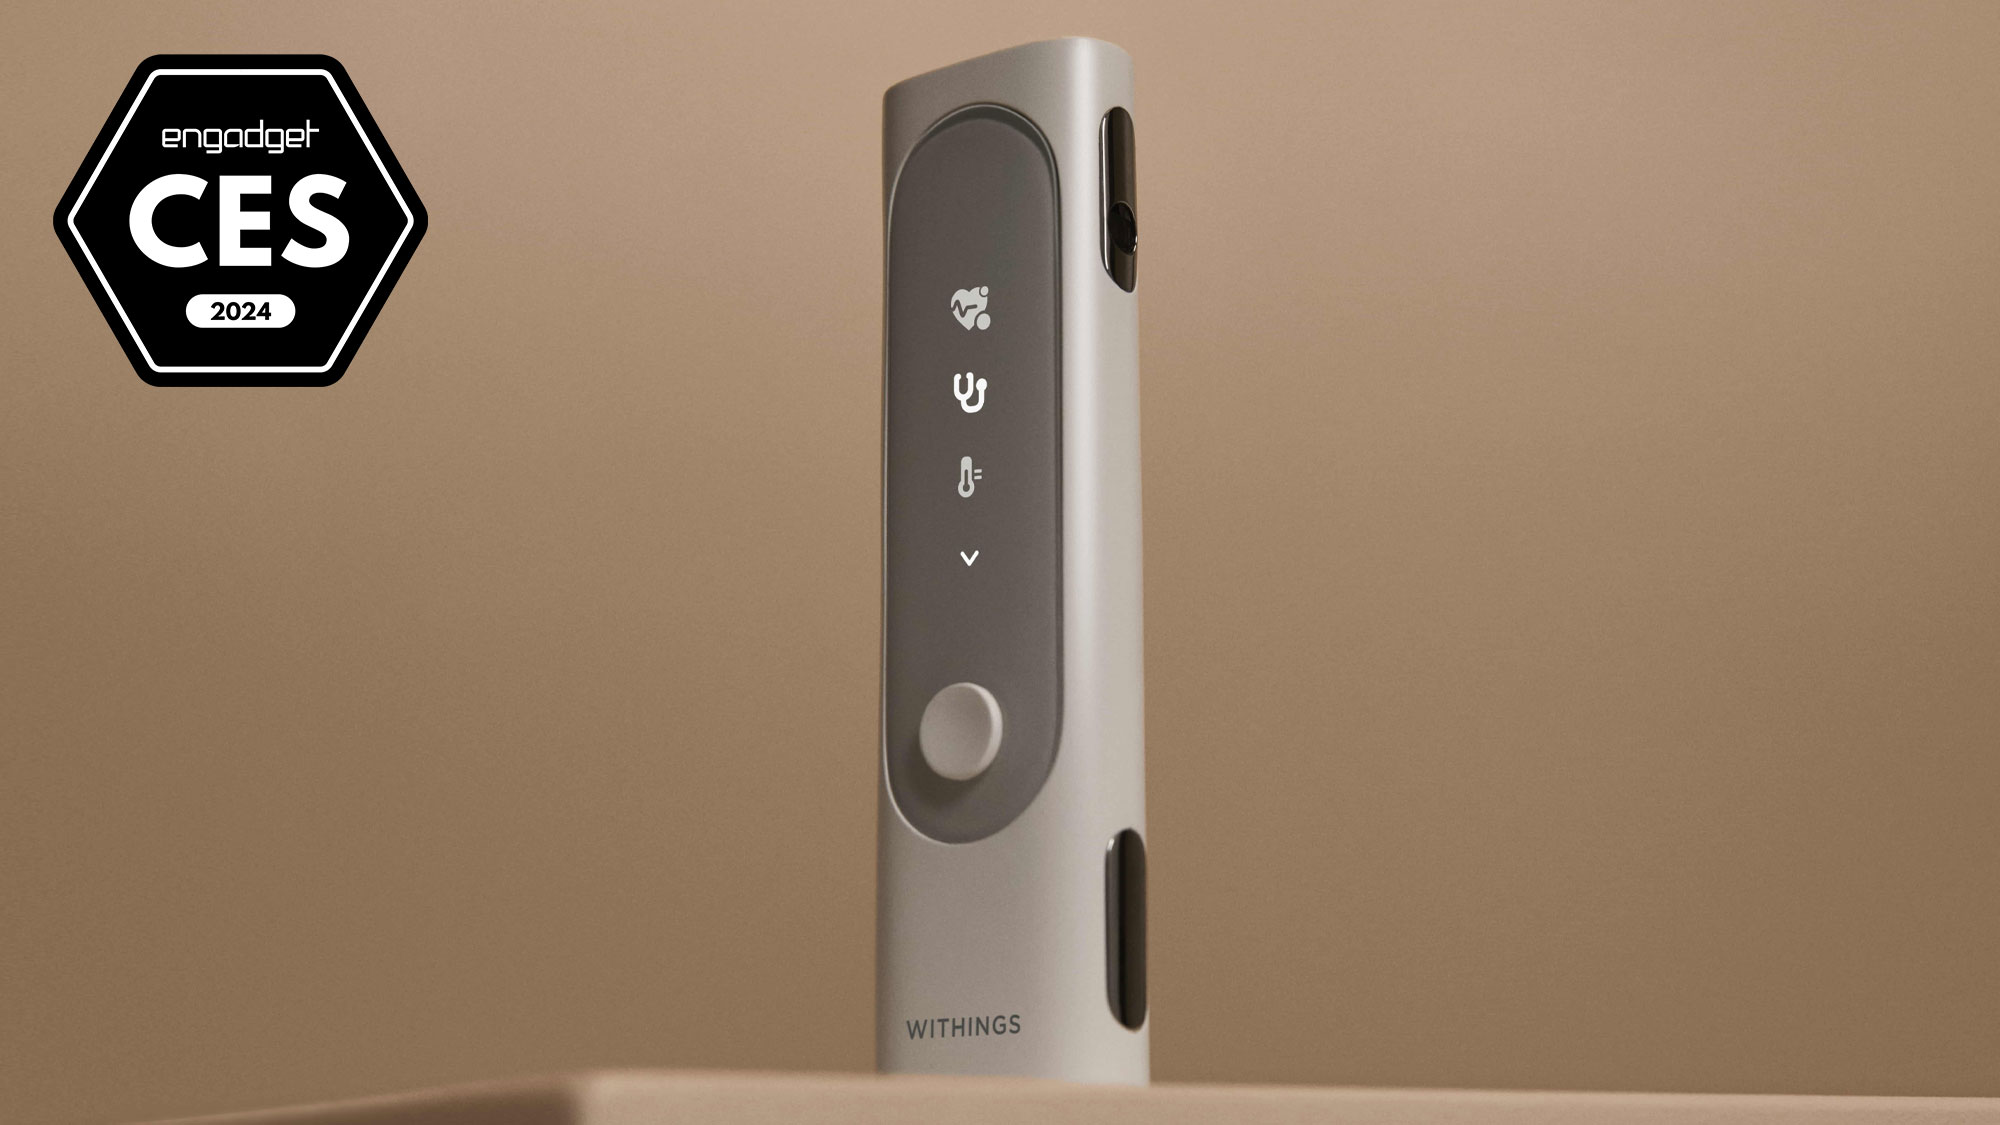 An image with a badge for Engadget Best of CES 2024 showing the product: Withings BeamO device which is similar in shape to a TV remote control standing on its end against a beige background.